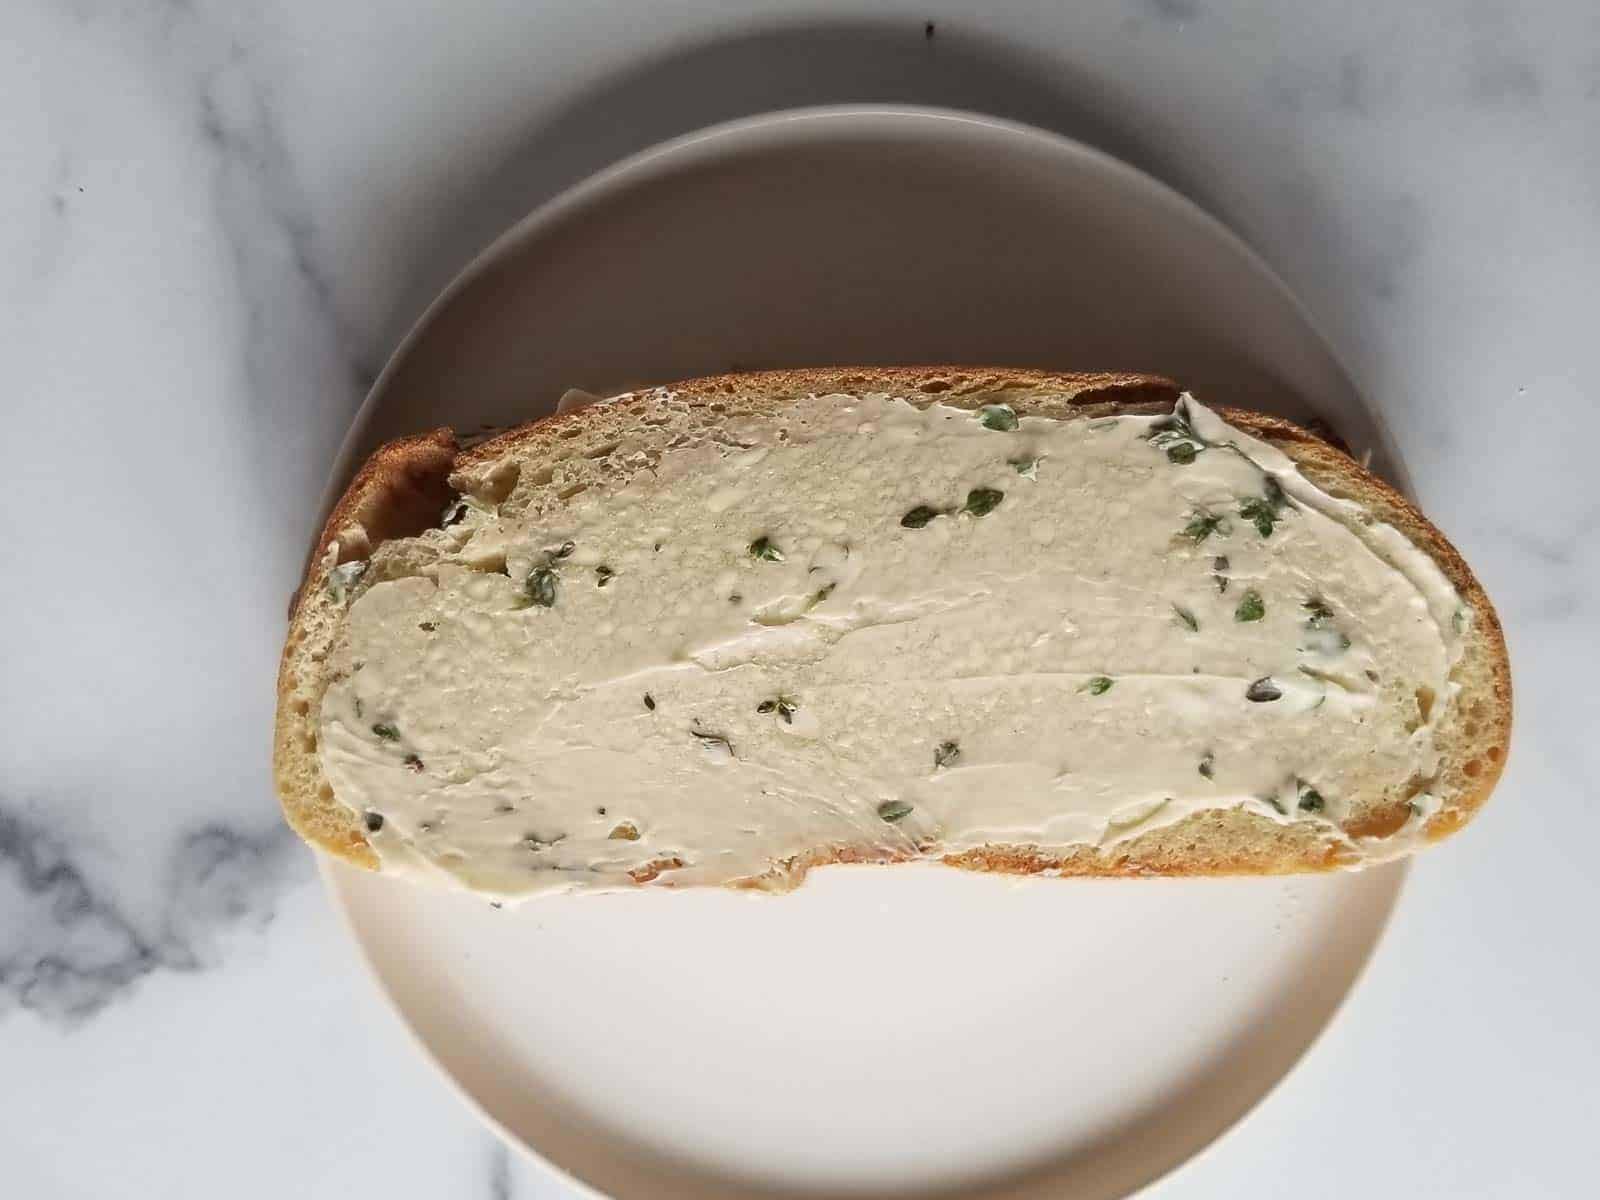 Bread spread with thyme butter ready to be grilled.